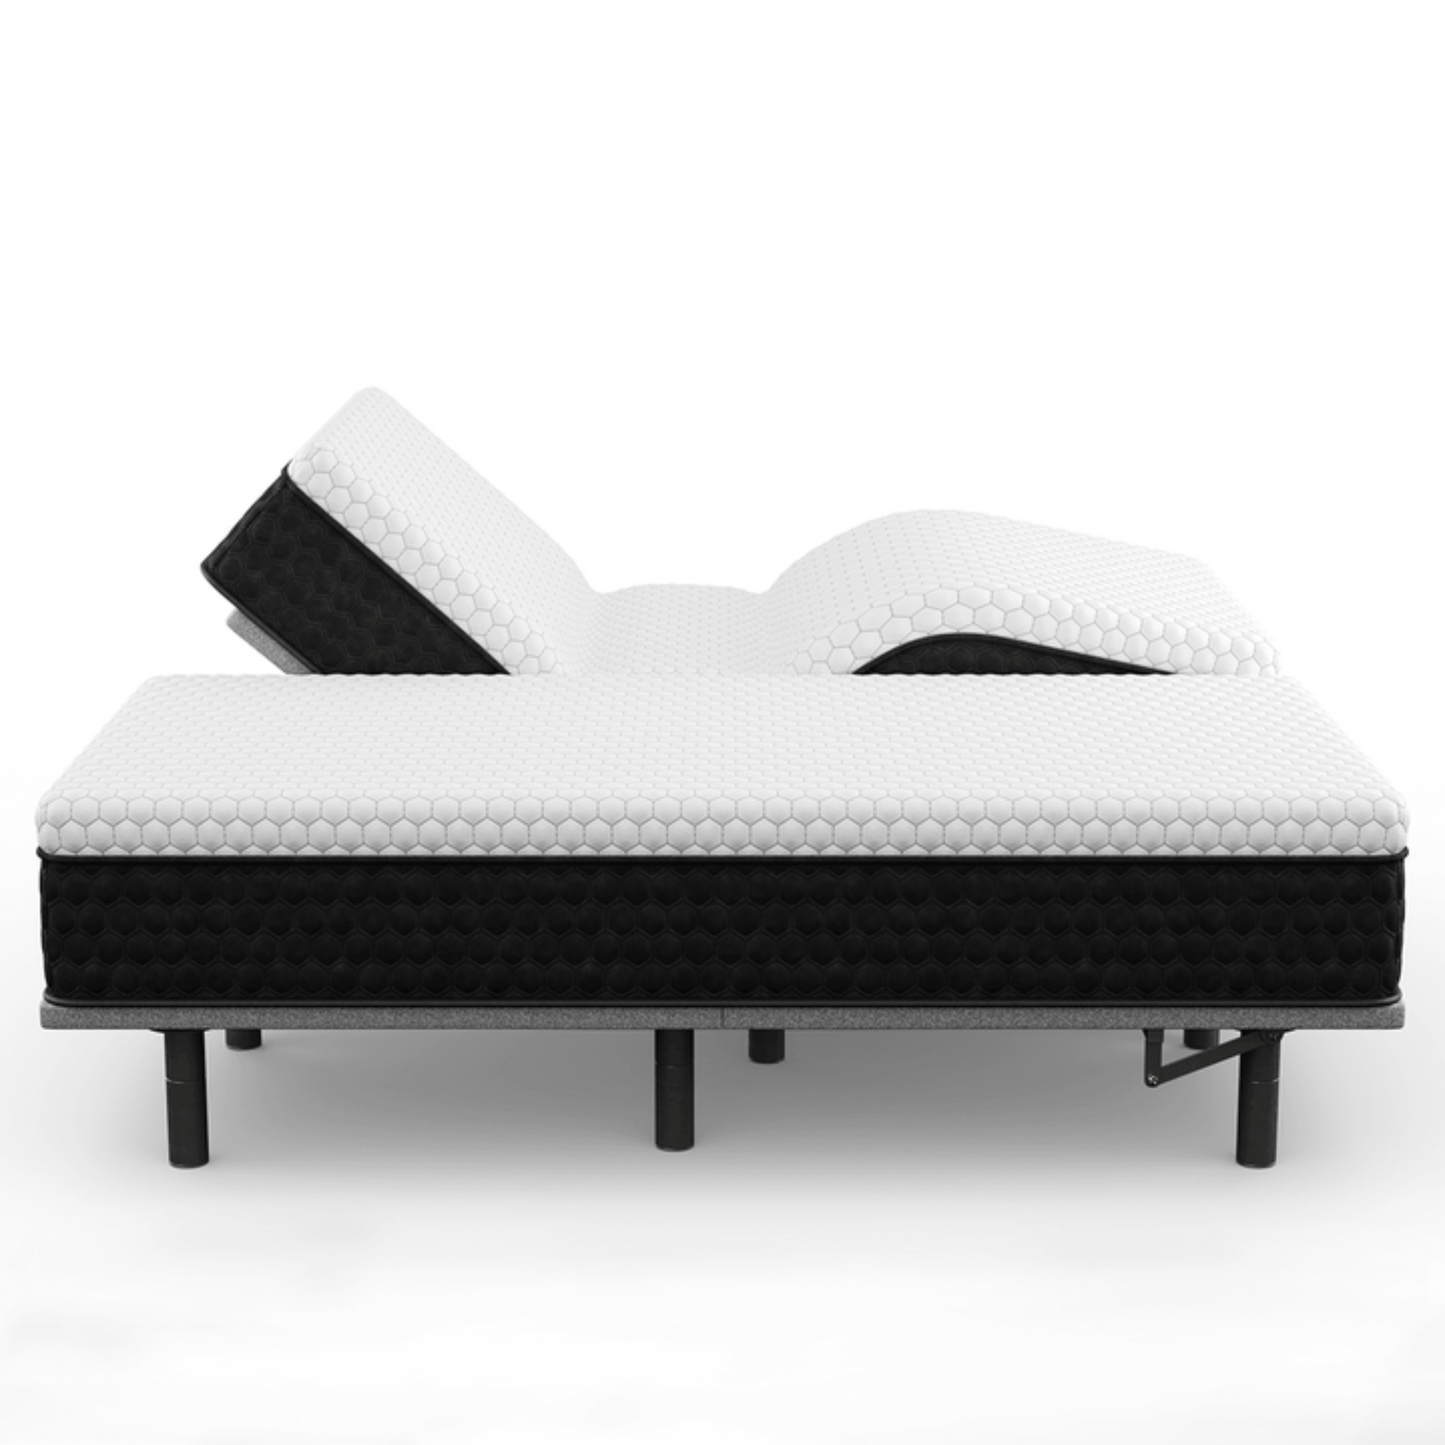 Doms 12" Adjustable Mattress Base, Side View With Right Side Head And Legs Up And Left Side Flat, Twin XL